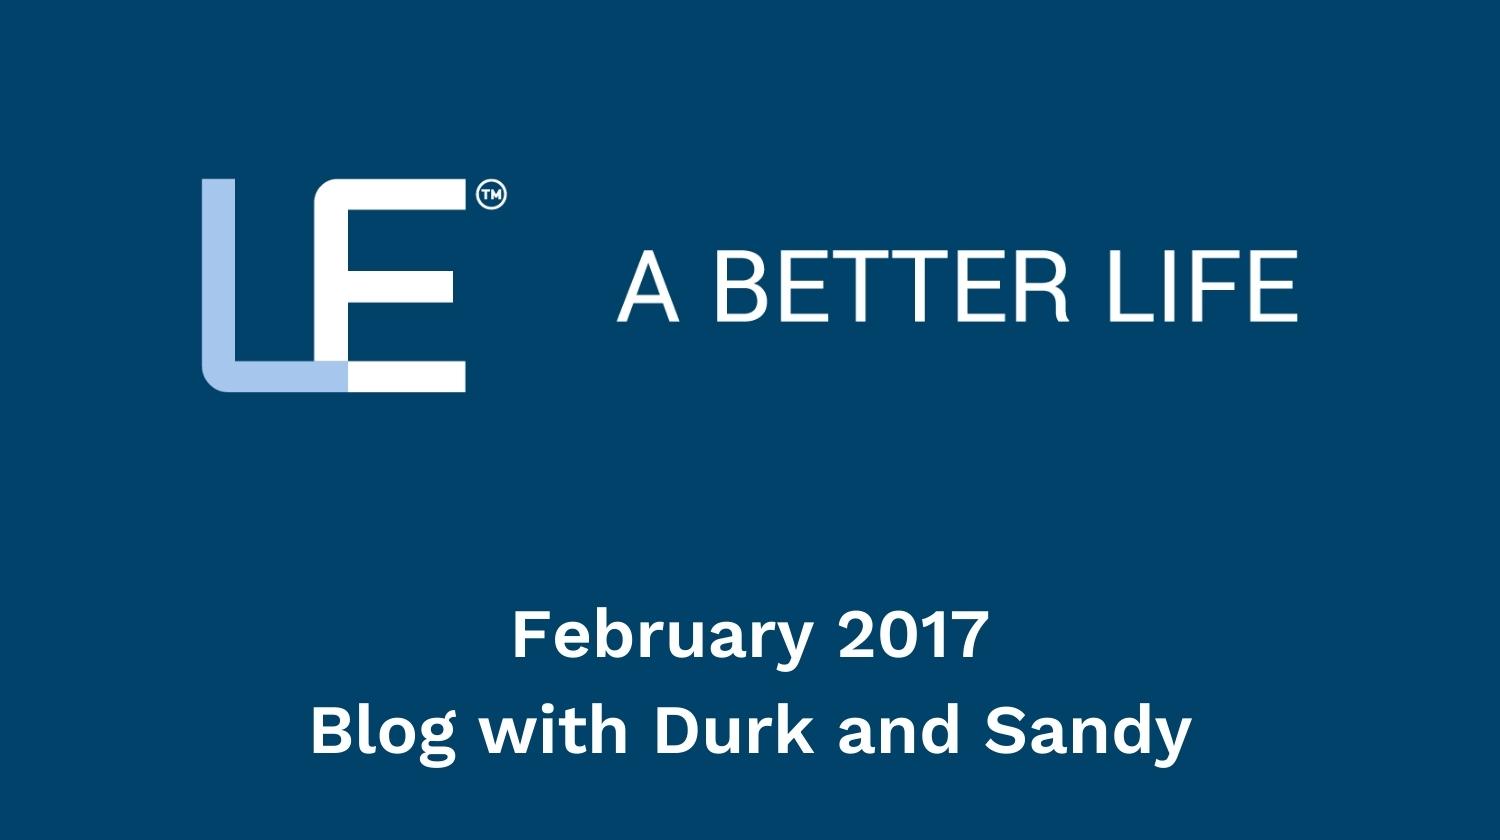 February 2017 Blog with Durk and Sandy